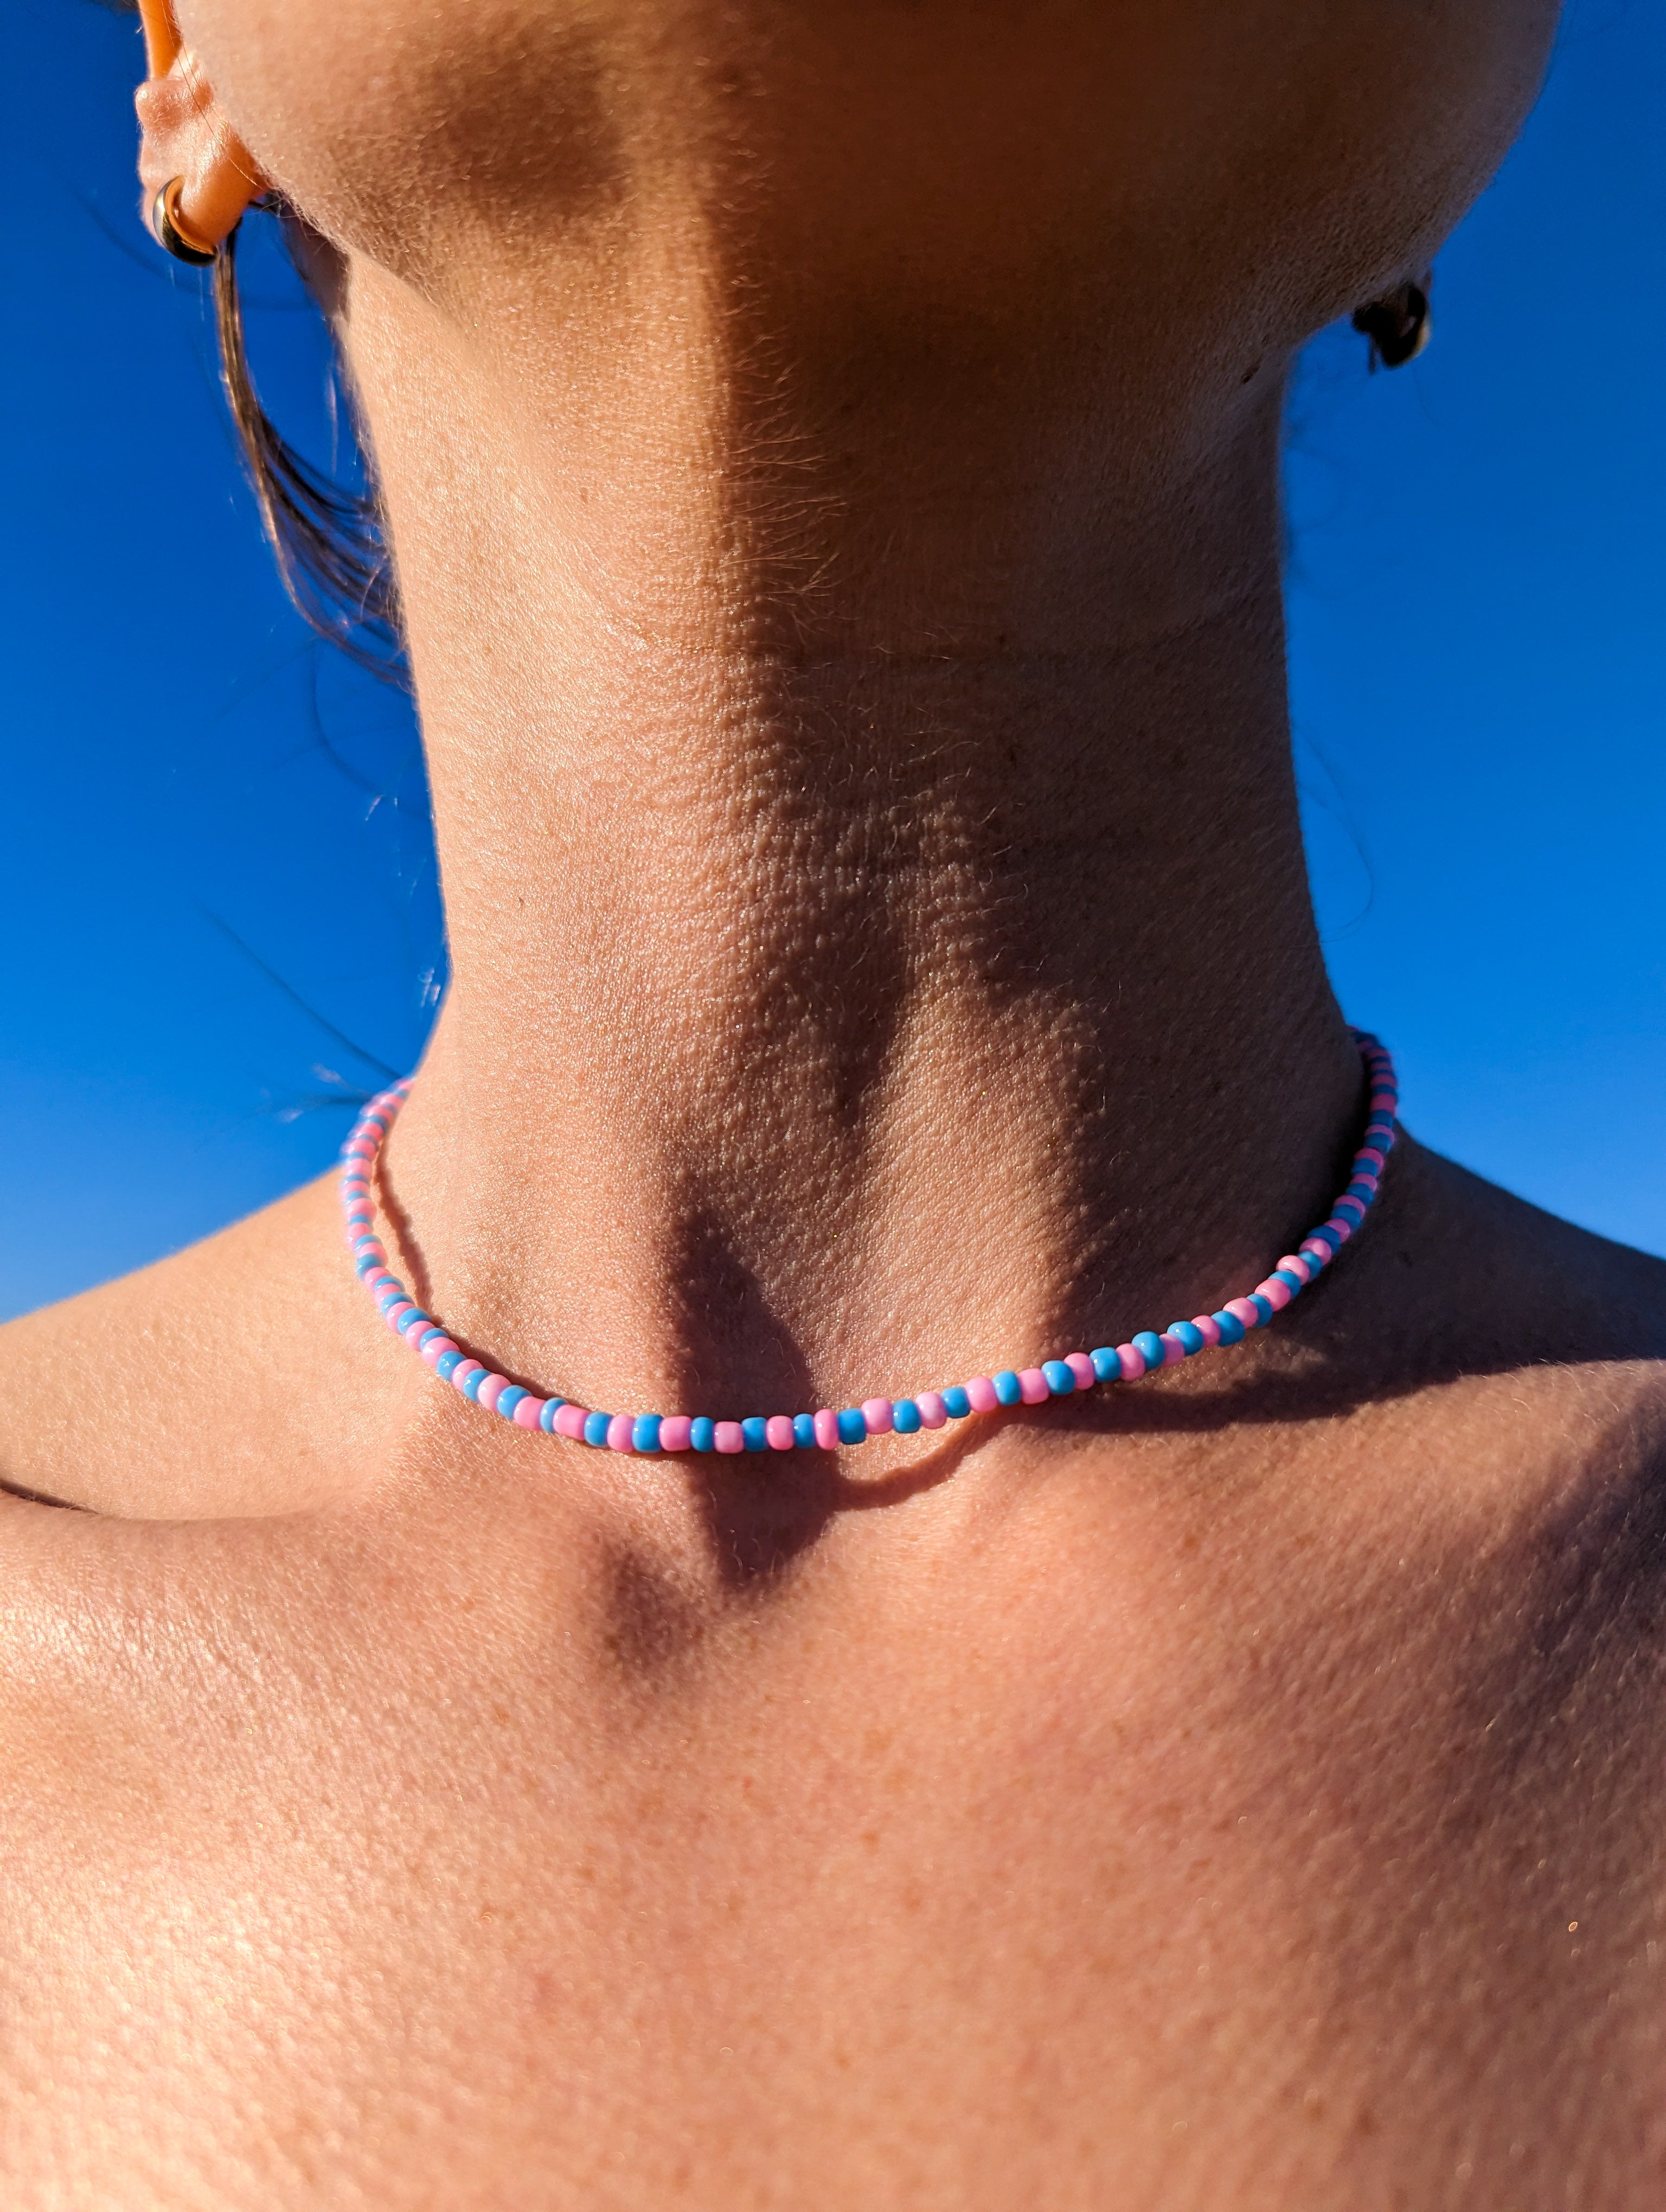 [THE TWO] Necklace: Pink/Blue [Small Beads]